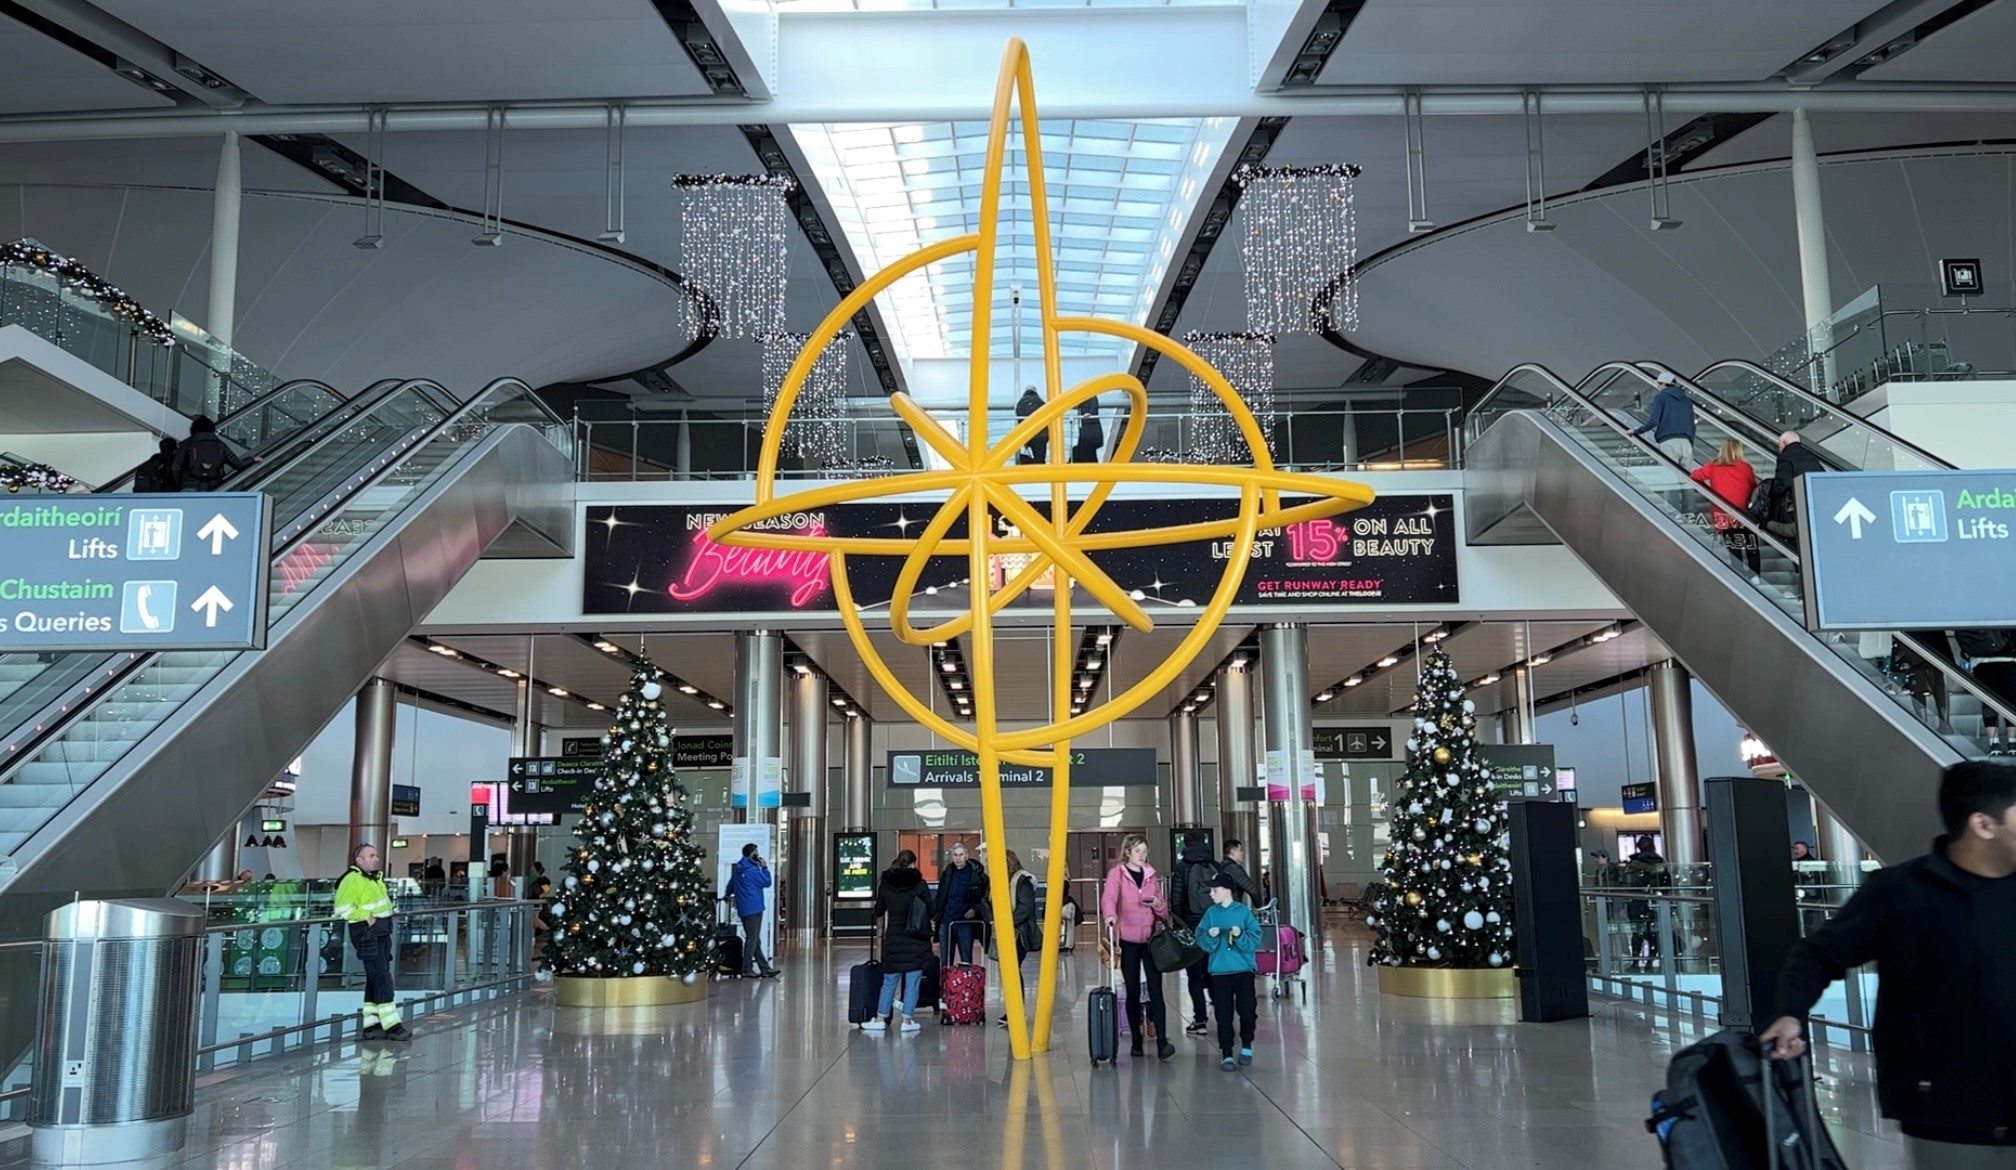 Dublin Airport Outlines Top Tips for Passengers Ahead of Christmas